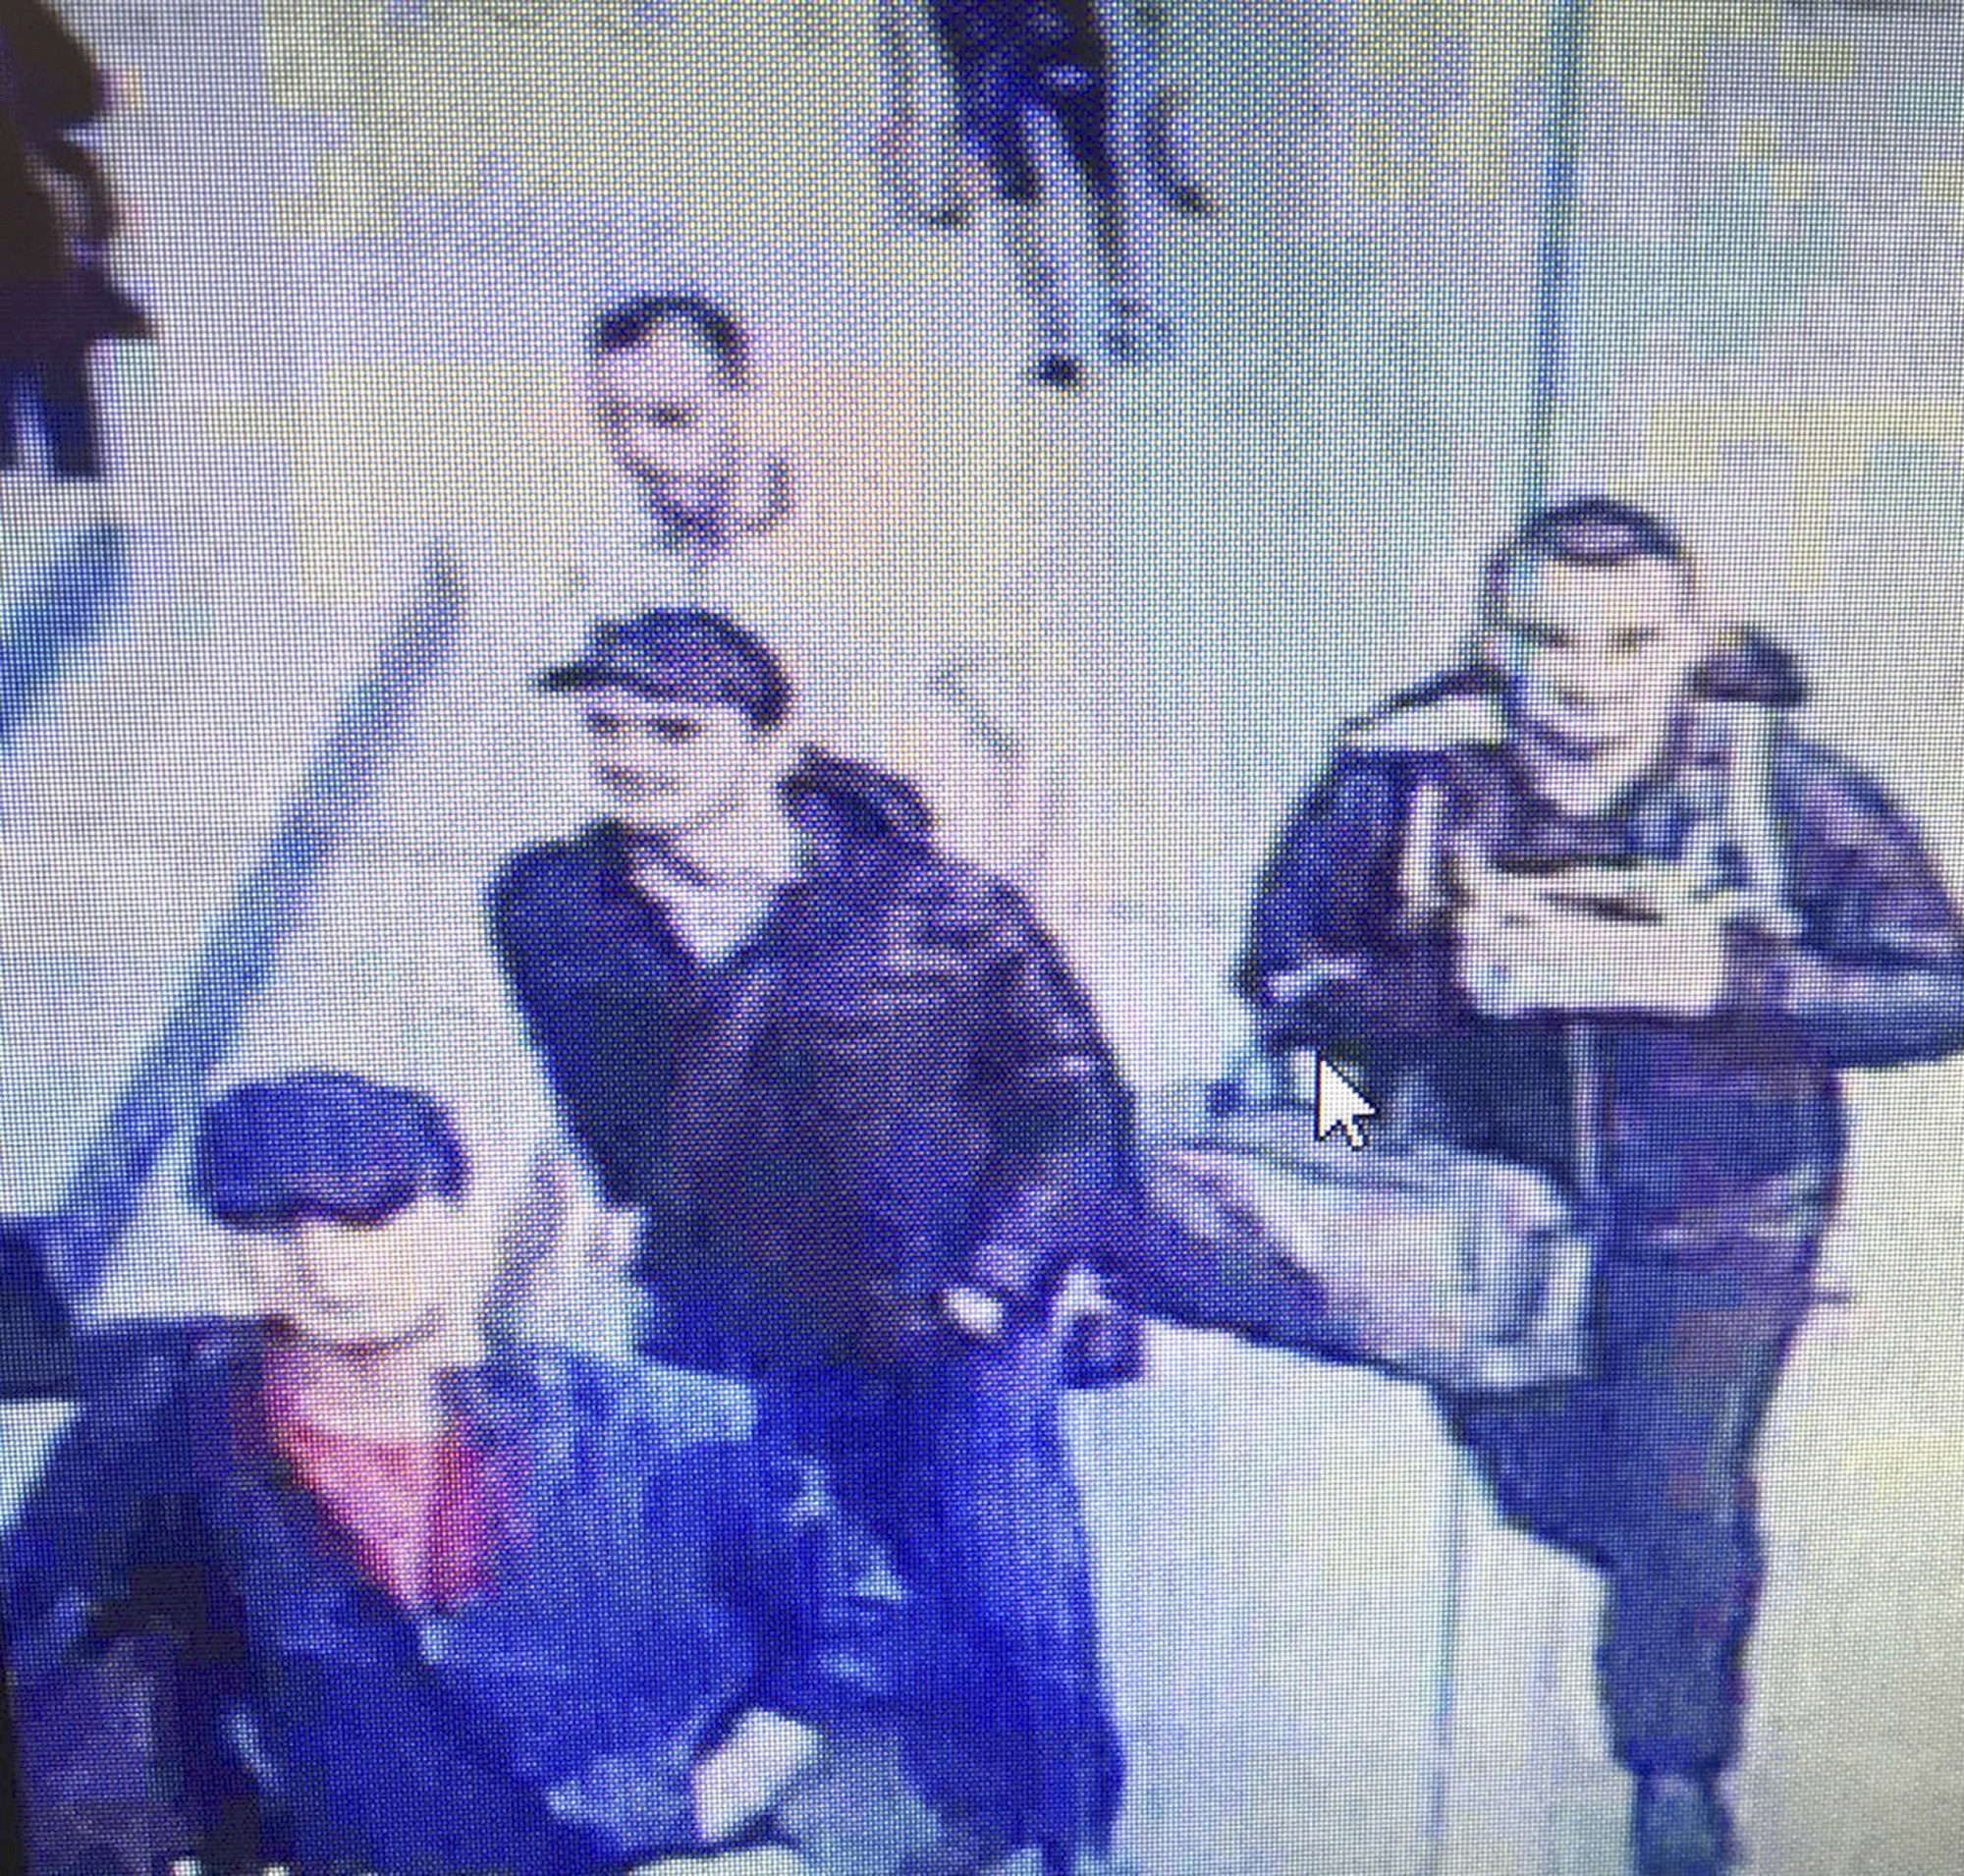 PHOTO: In this framegrab from CCTV video, made available by the Turkish Haberturk newspaper on Thursday, June 30, 2016, people believed to be the attackers walk in Istanbul's Ataturk airport, Tuesday June 28, 2016. 